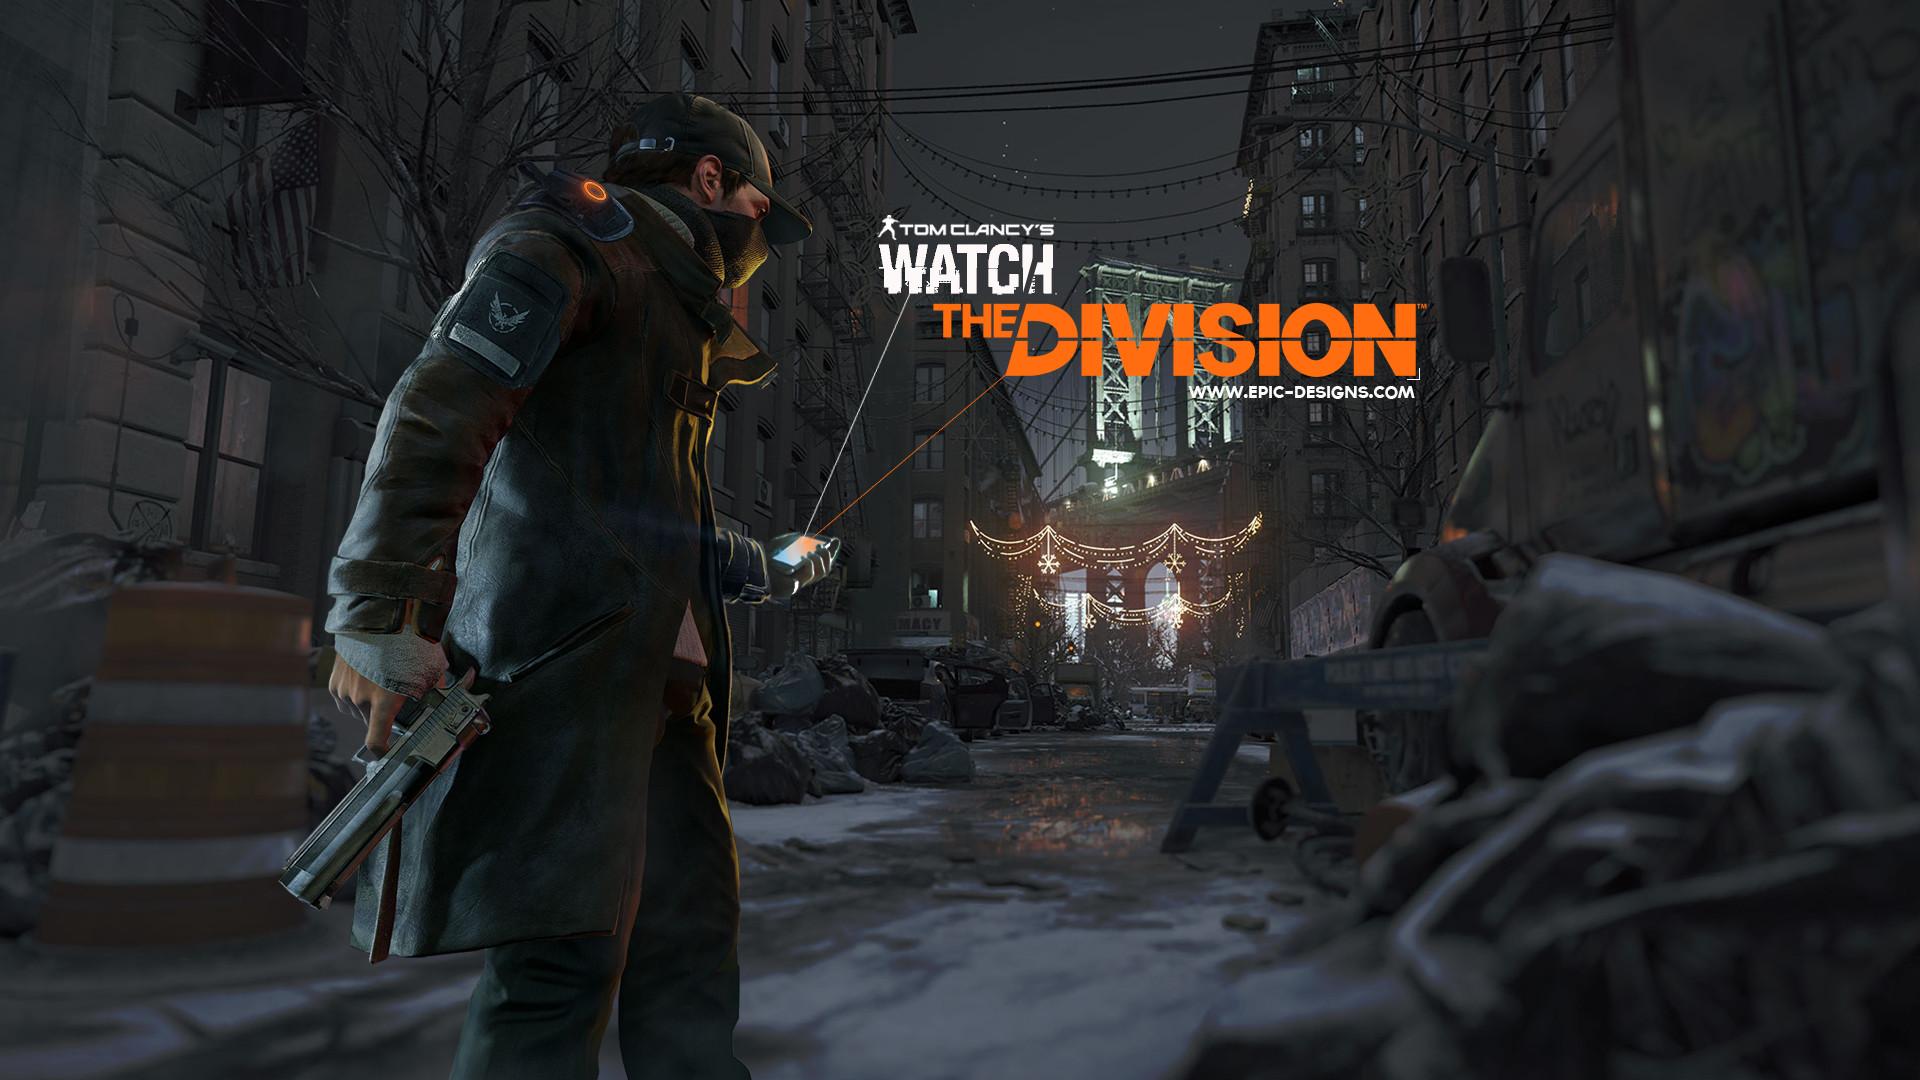 The Division Wallpaper 1920x1080